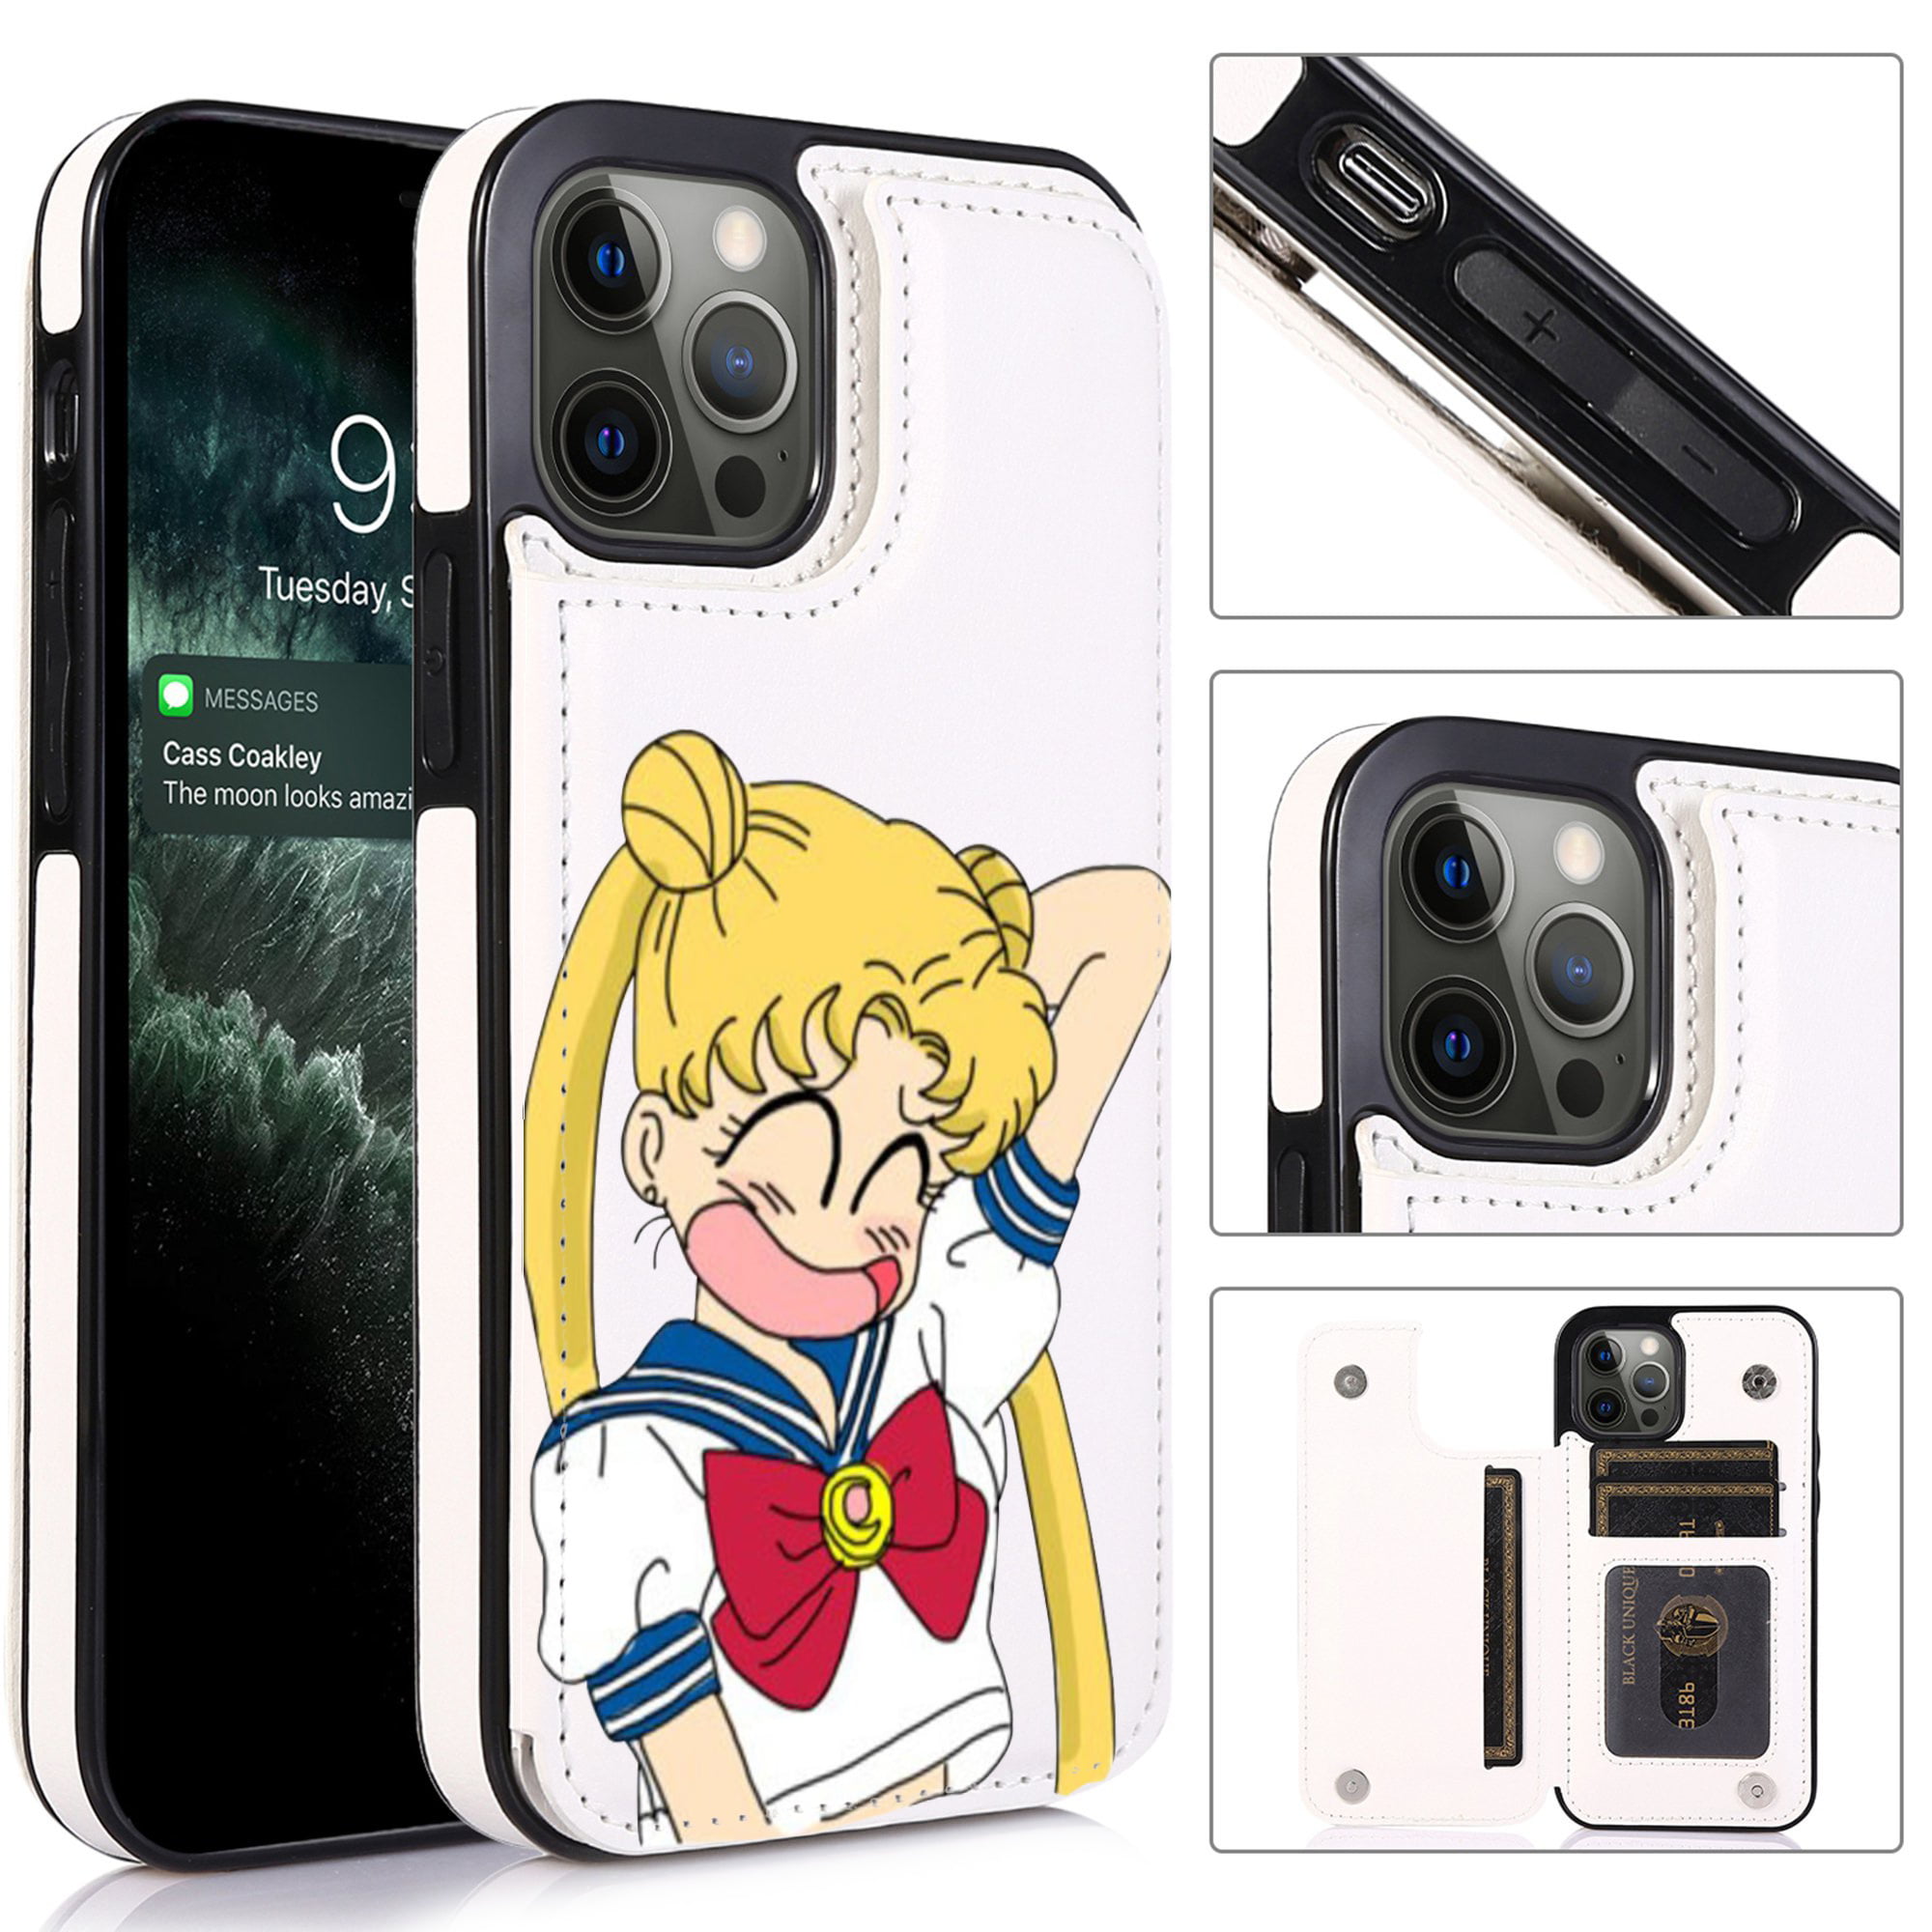 INTELLIZE Back Cover For APPLE iPHONE 7 iPHONE 8 iPHONE SE GIRL ANIME  BTS LOVELY GIRL CARTOON CUTE GIRL DOLL